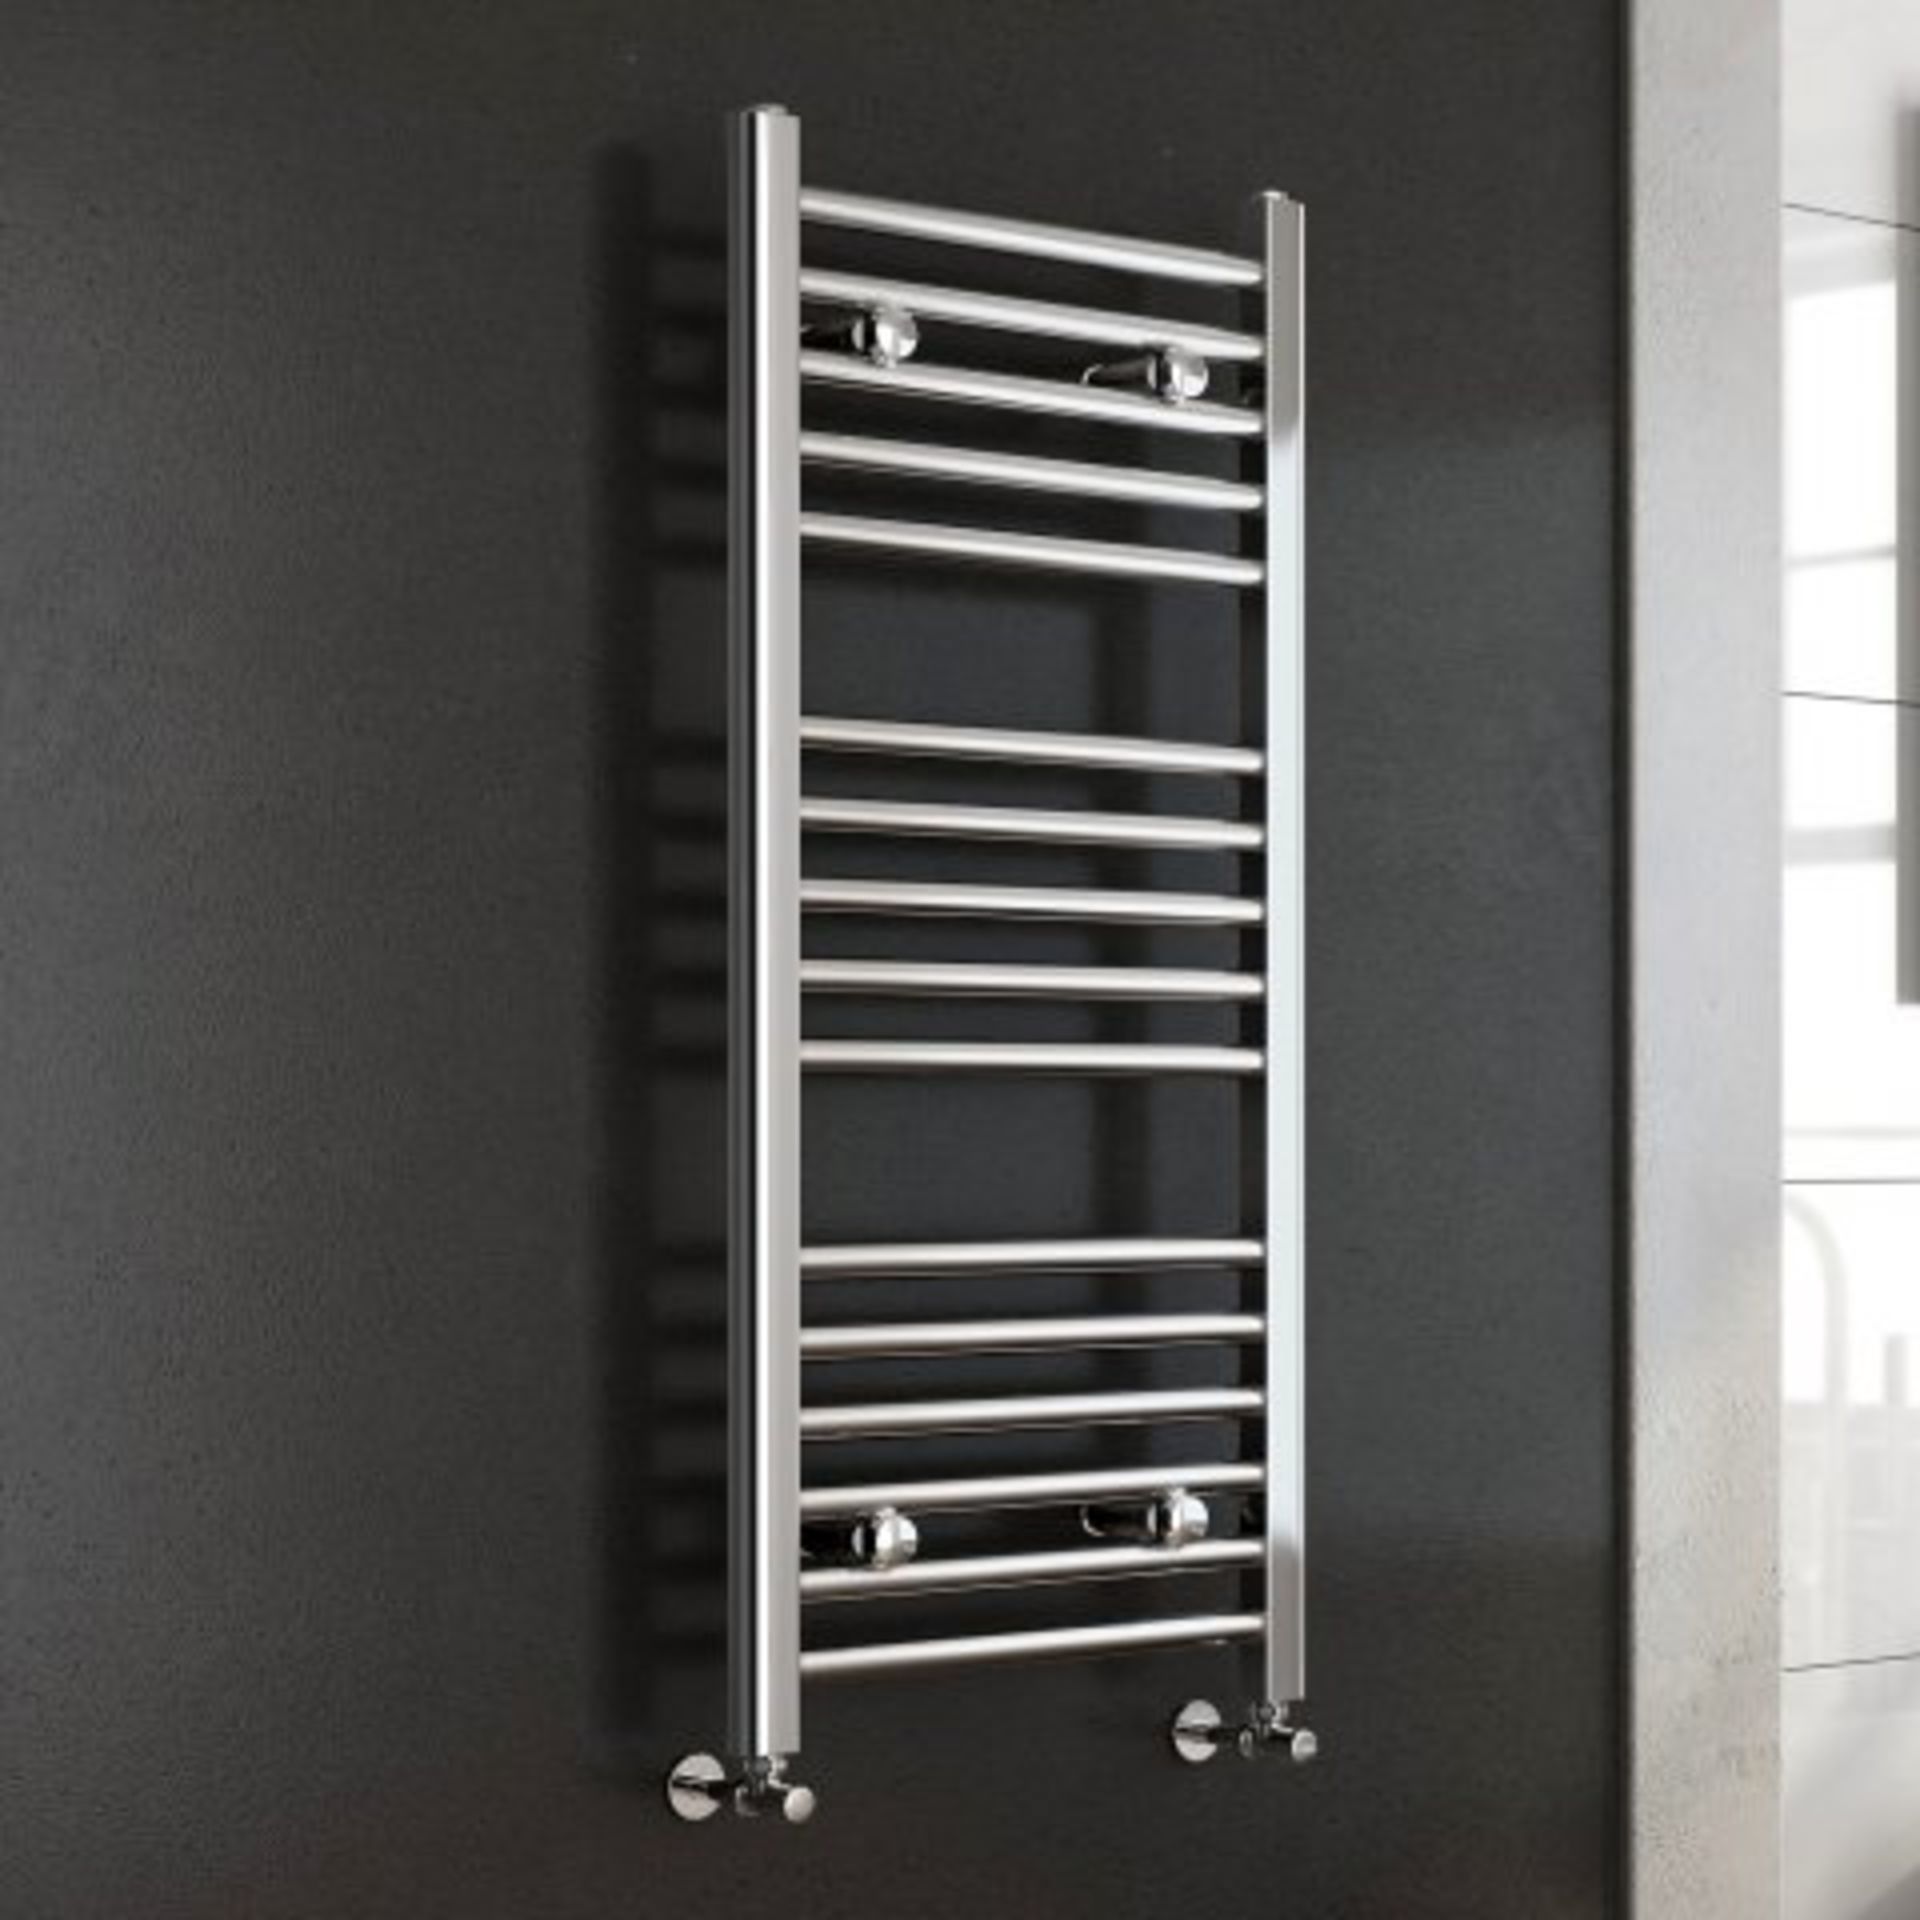 (H136) 1000x450mm - 25mm Tubes - Chrome Heated Straight Rail Ladder Towel Radiator. Benefit from the